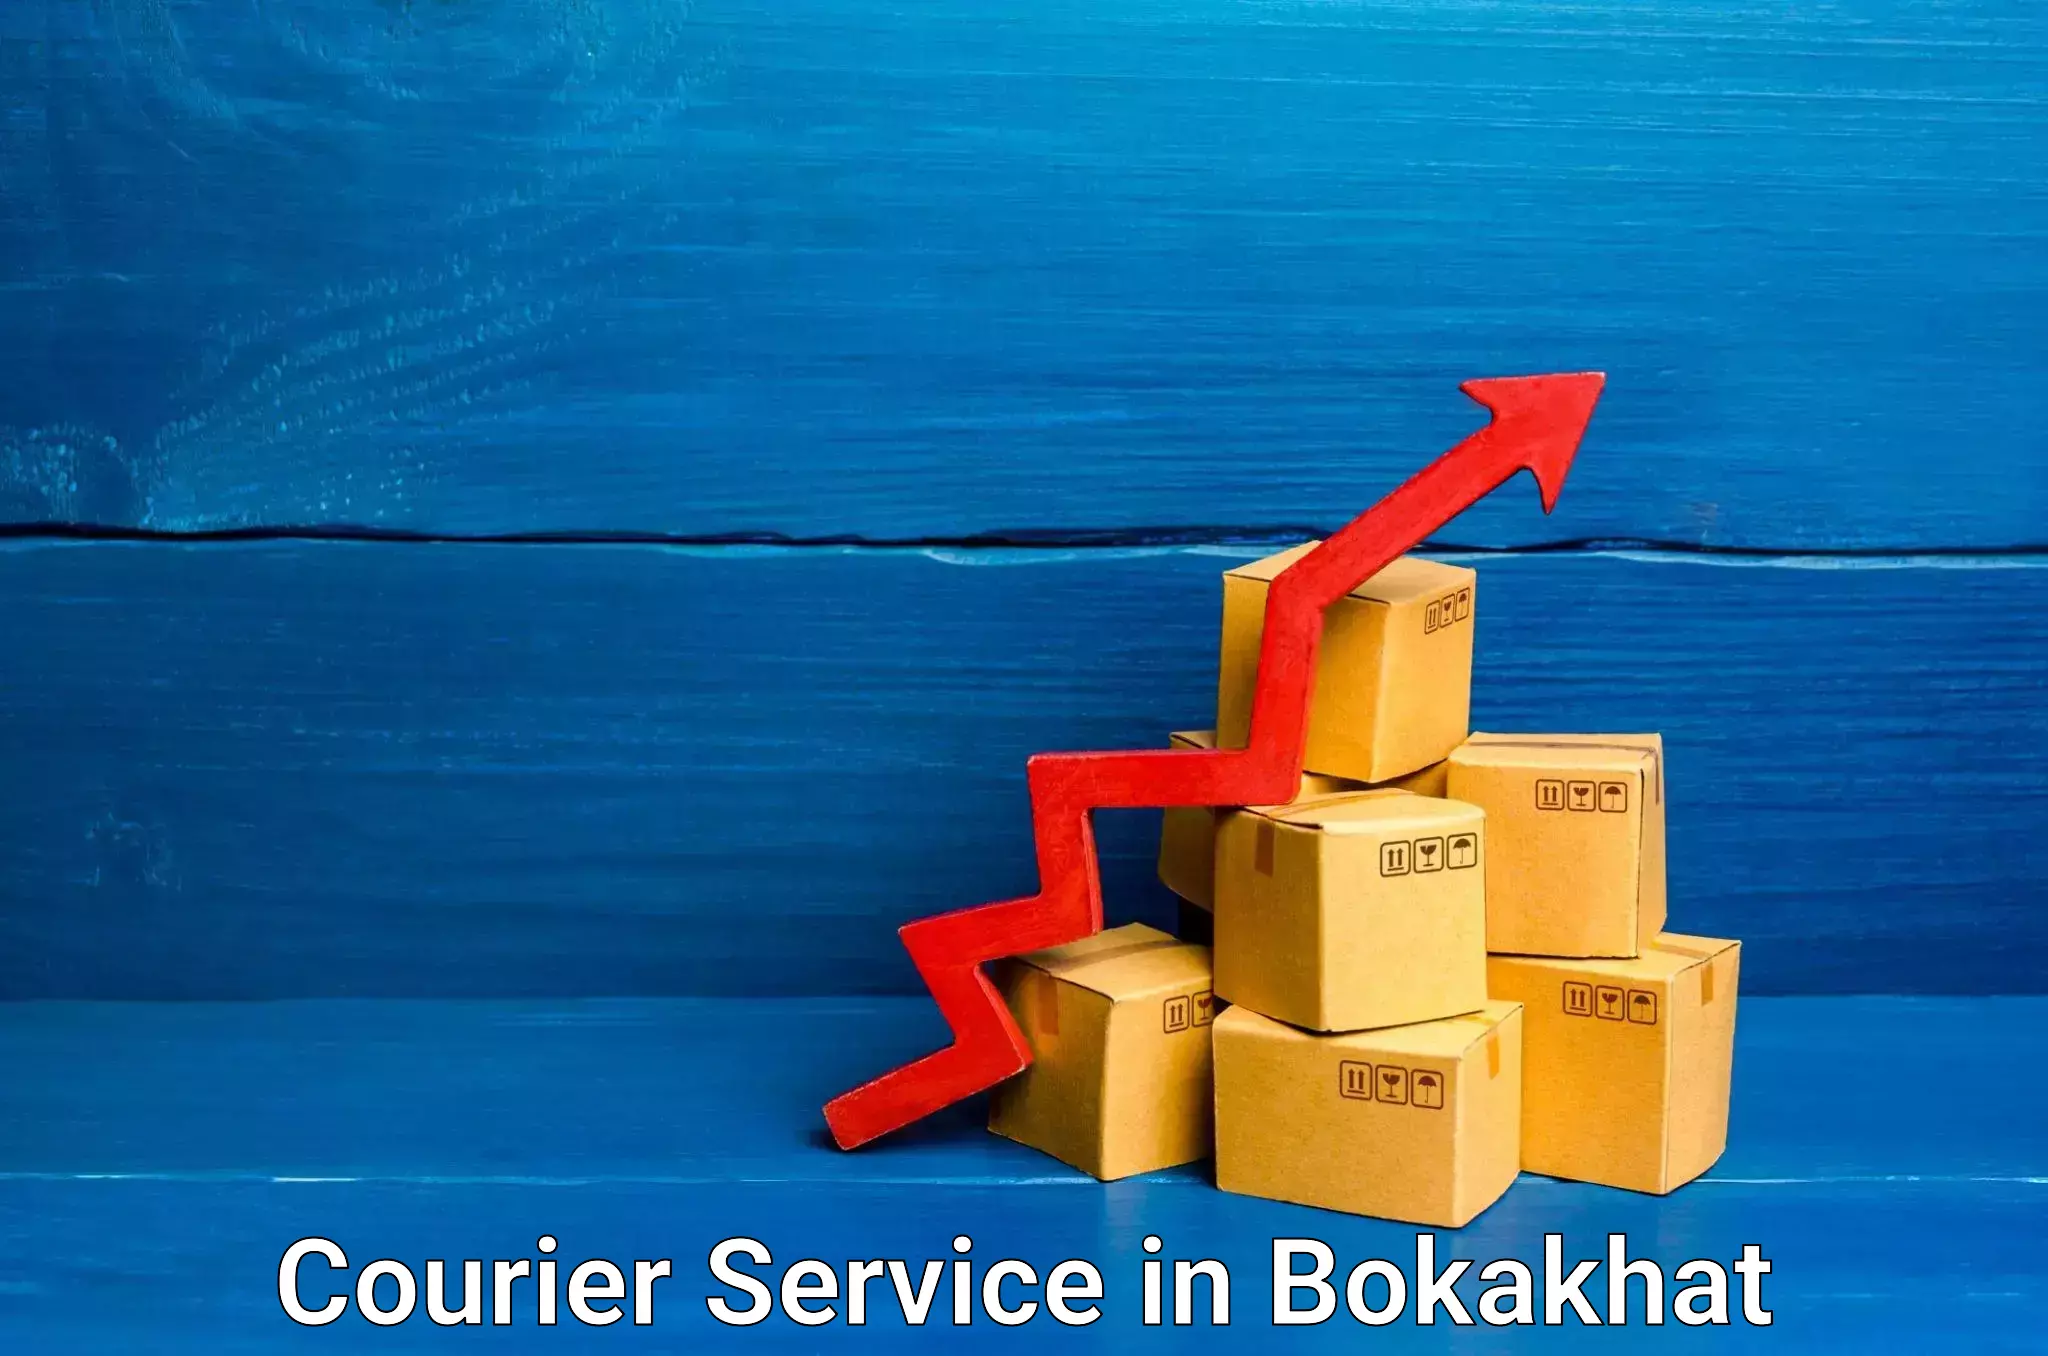 Courier service efficiency in Bokakhat